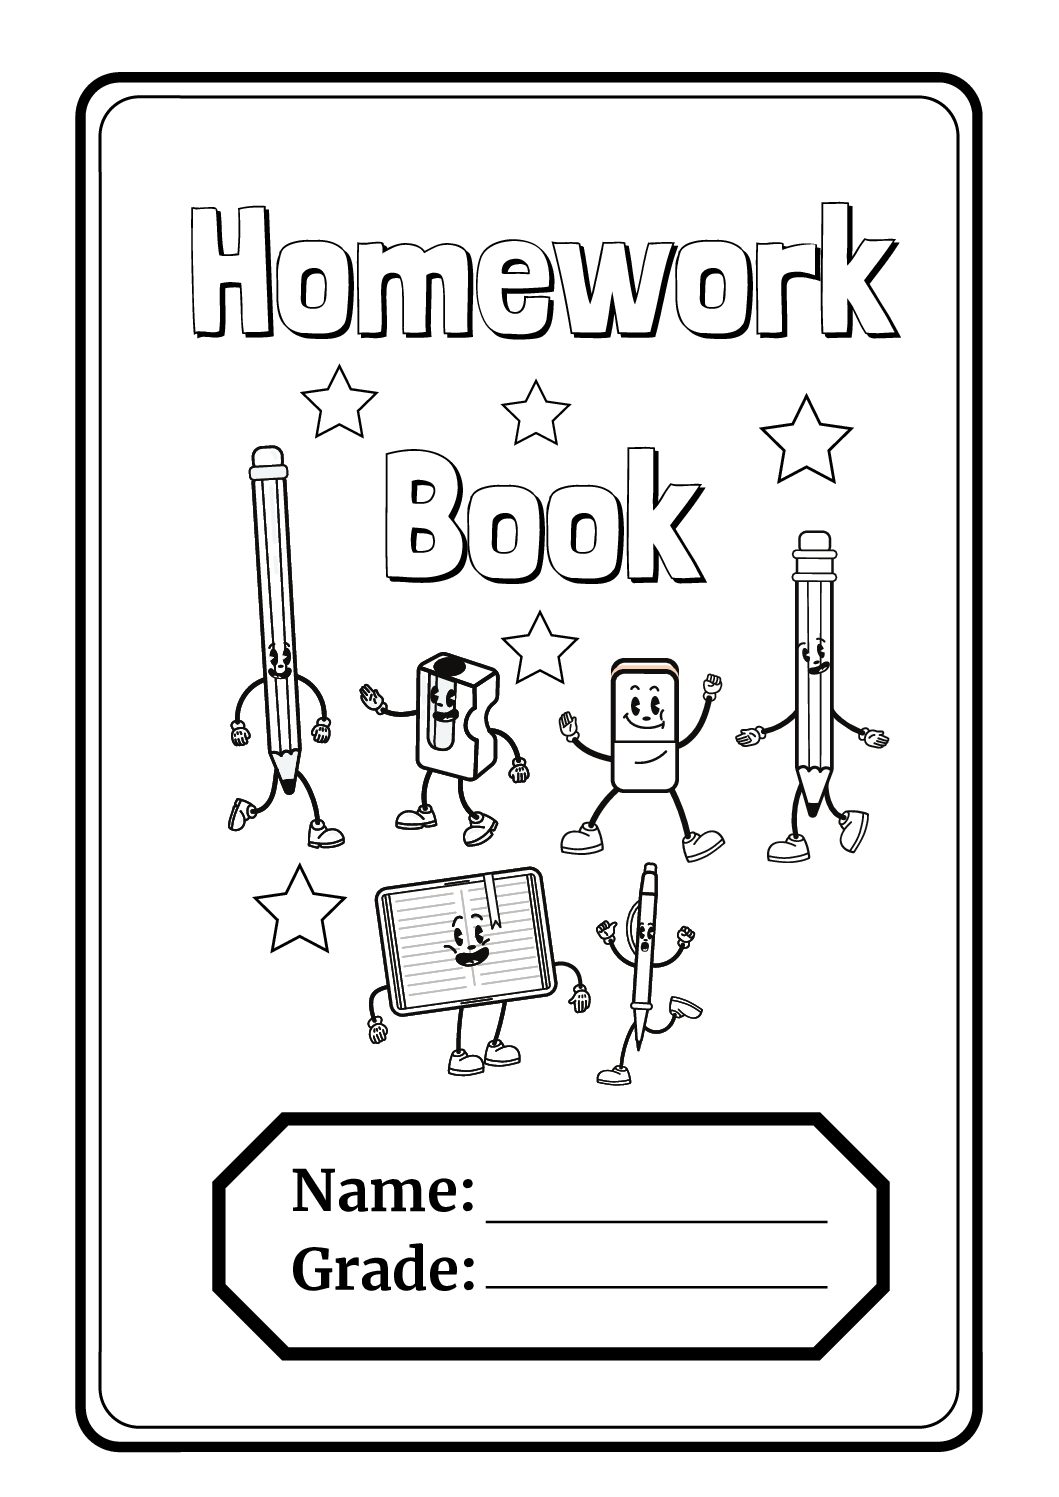 page for homework